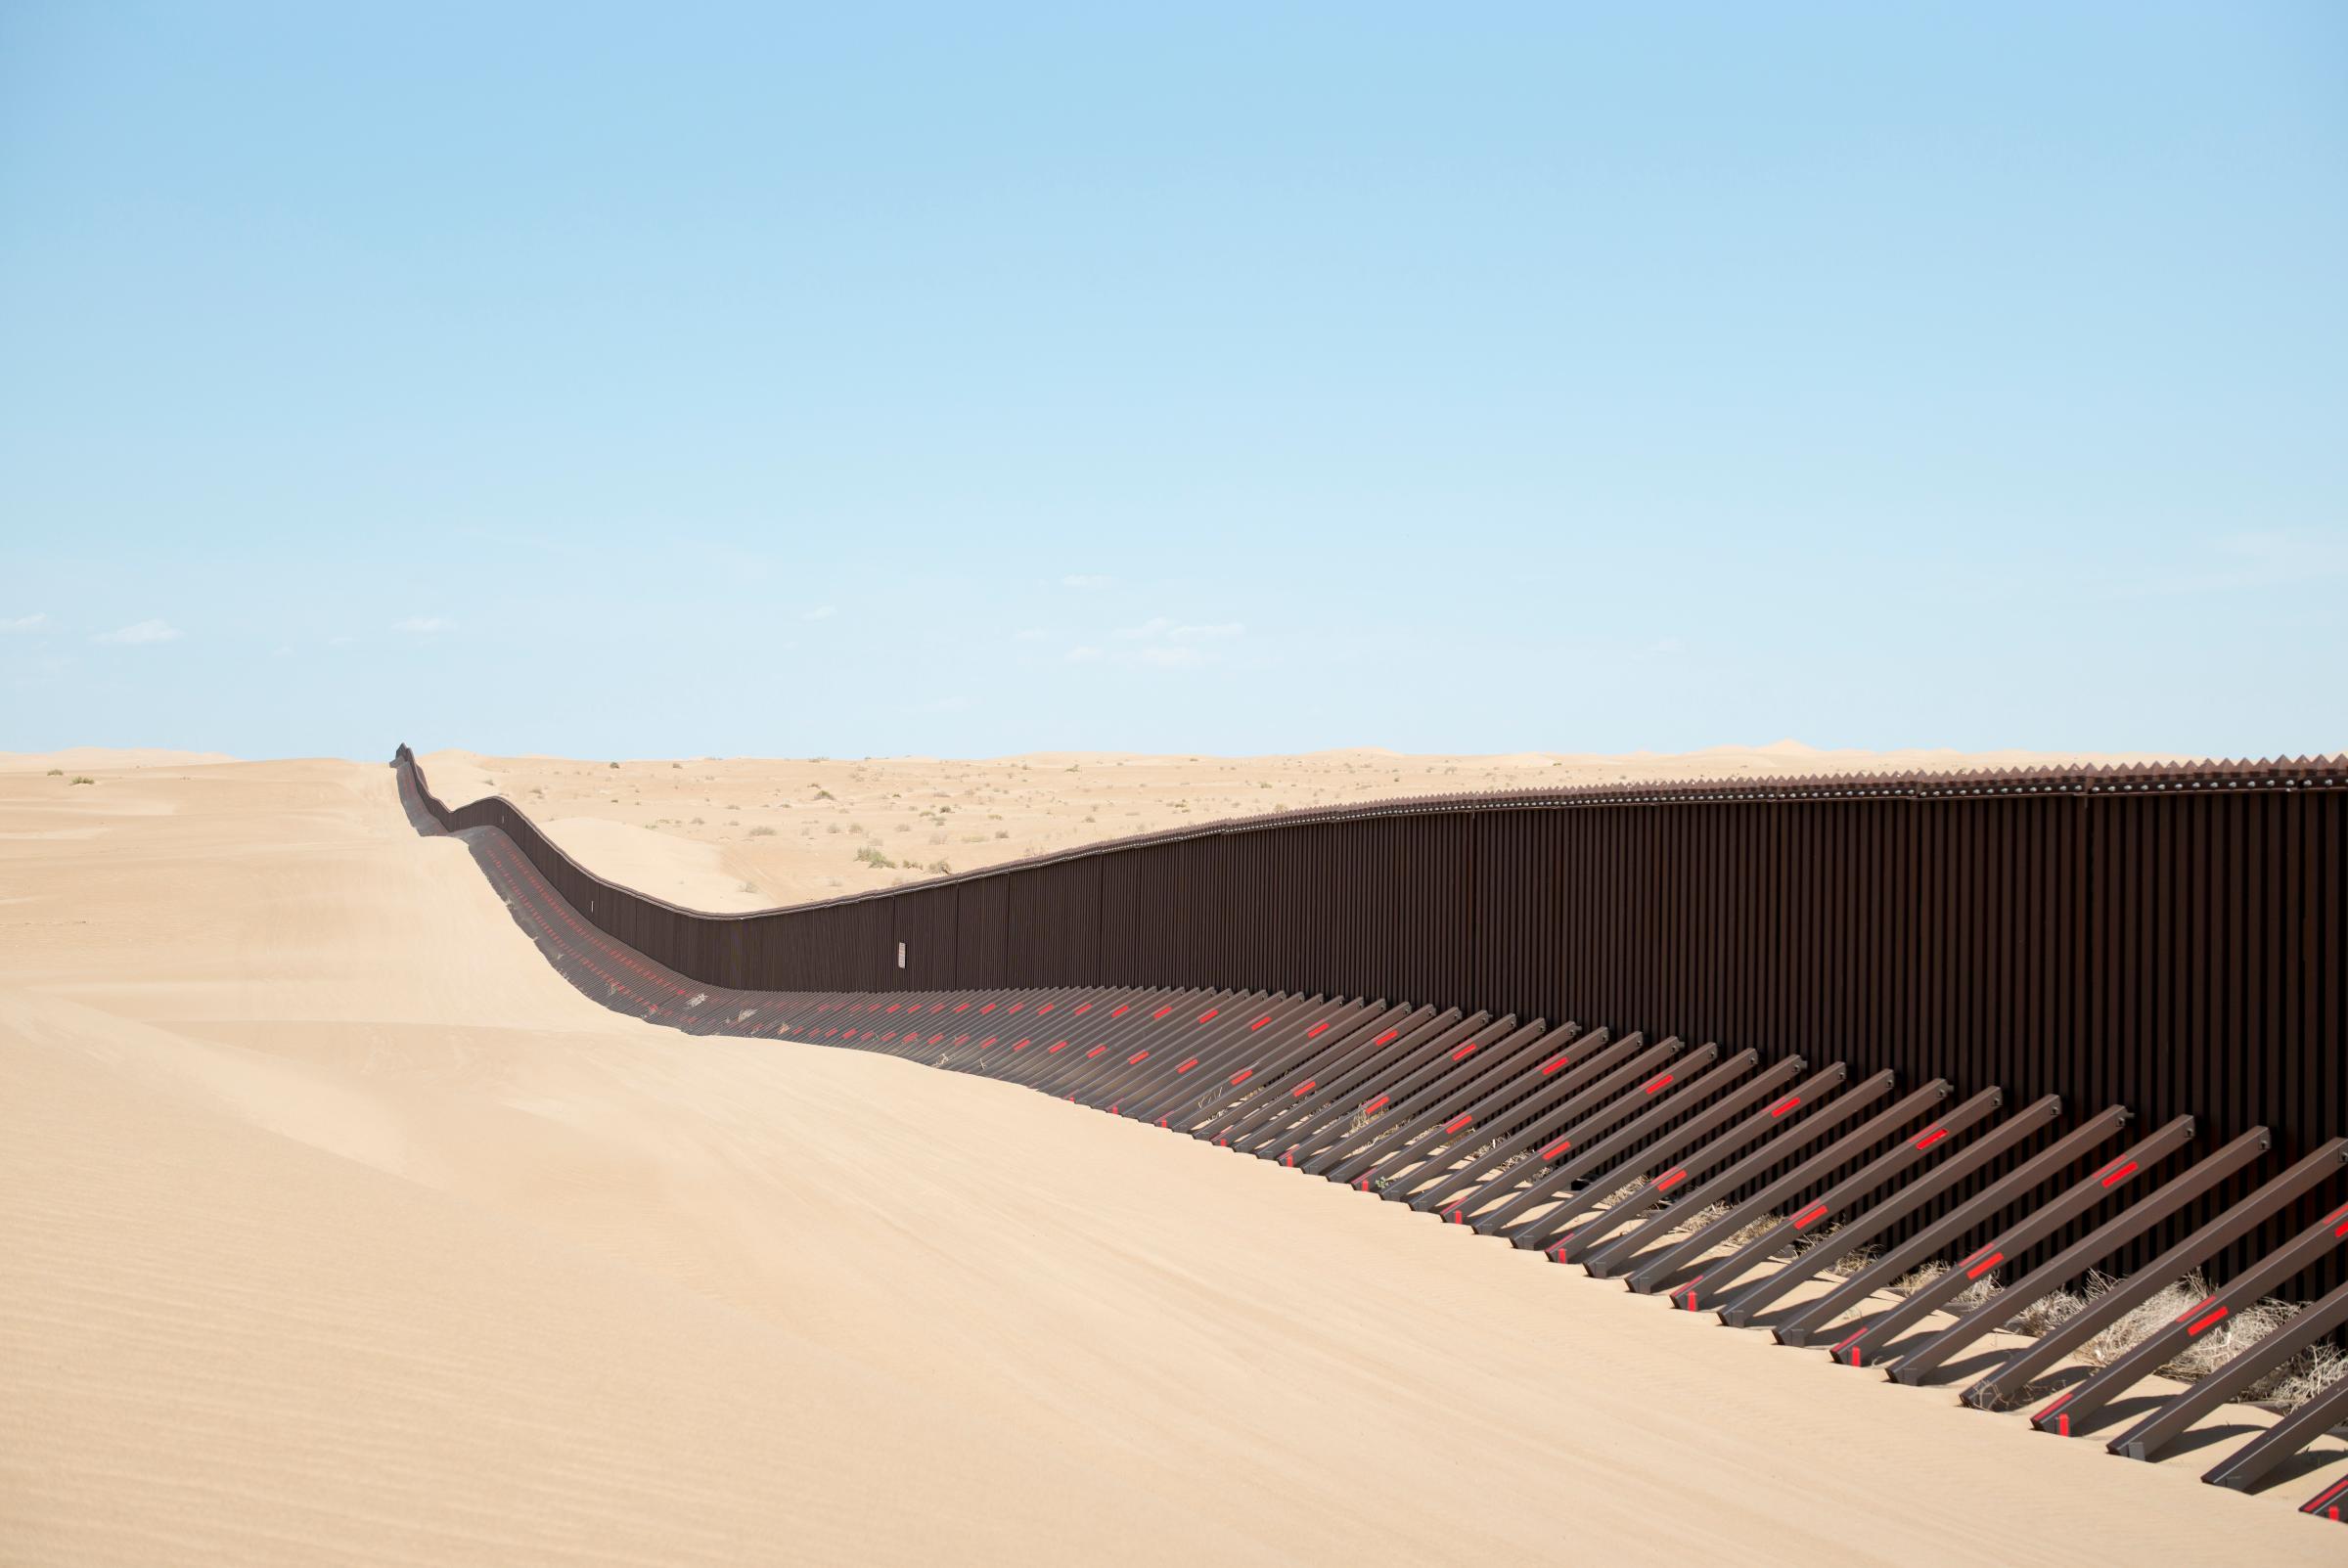 A section of the controversial US-Mexico border fence expansion project crosses previously pristine desert sands at sunrise on May 24, 2014 between Yuma, Arizona and Calexico, California.